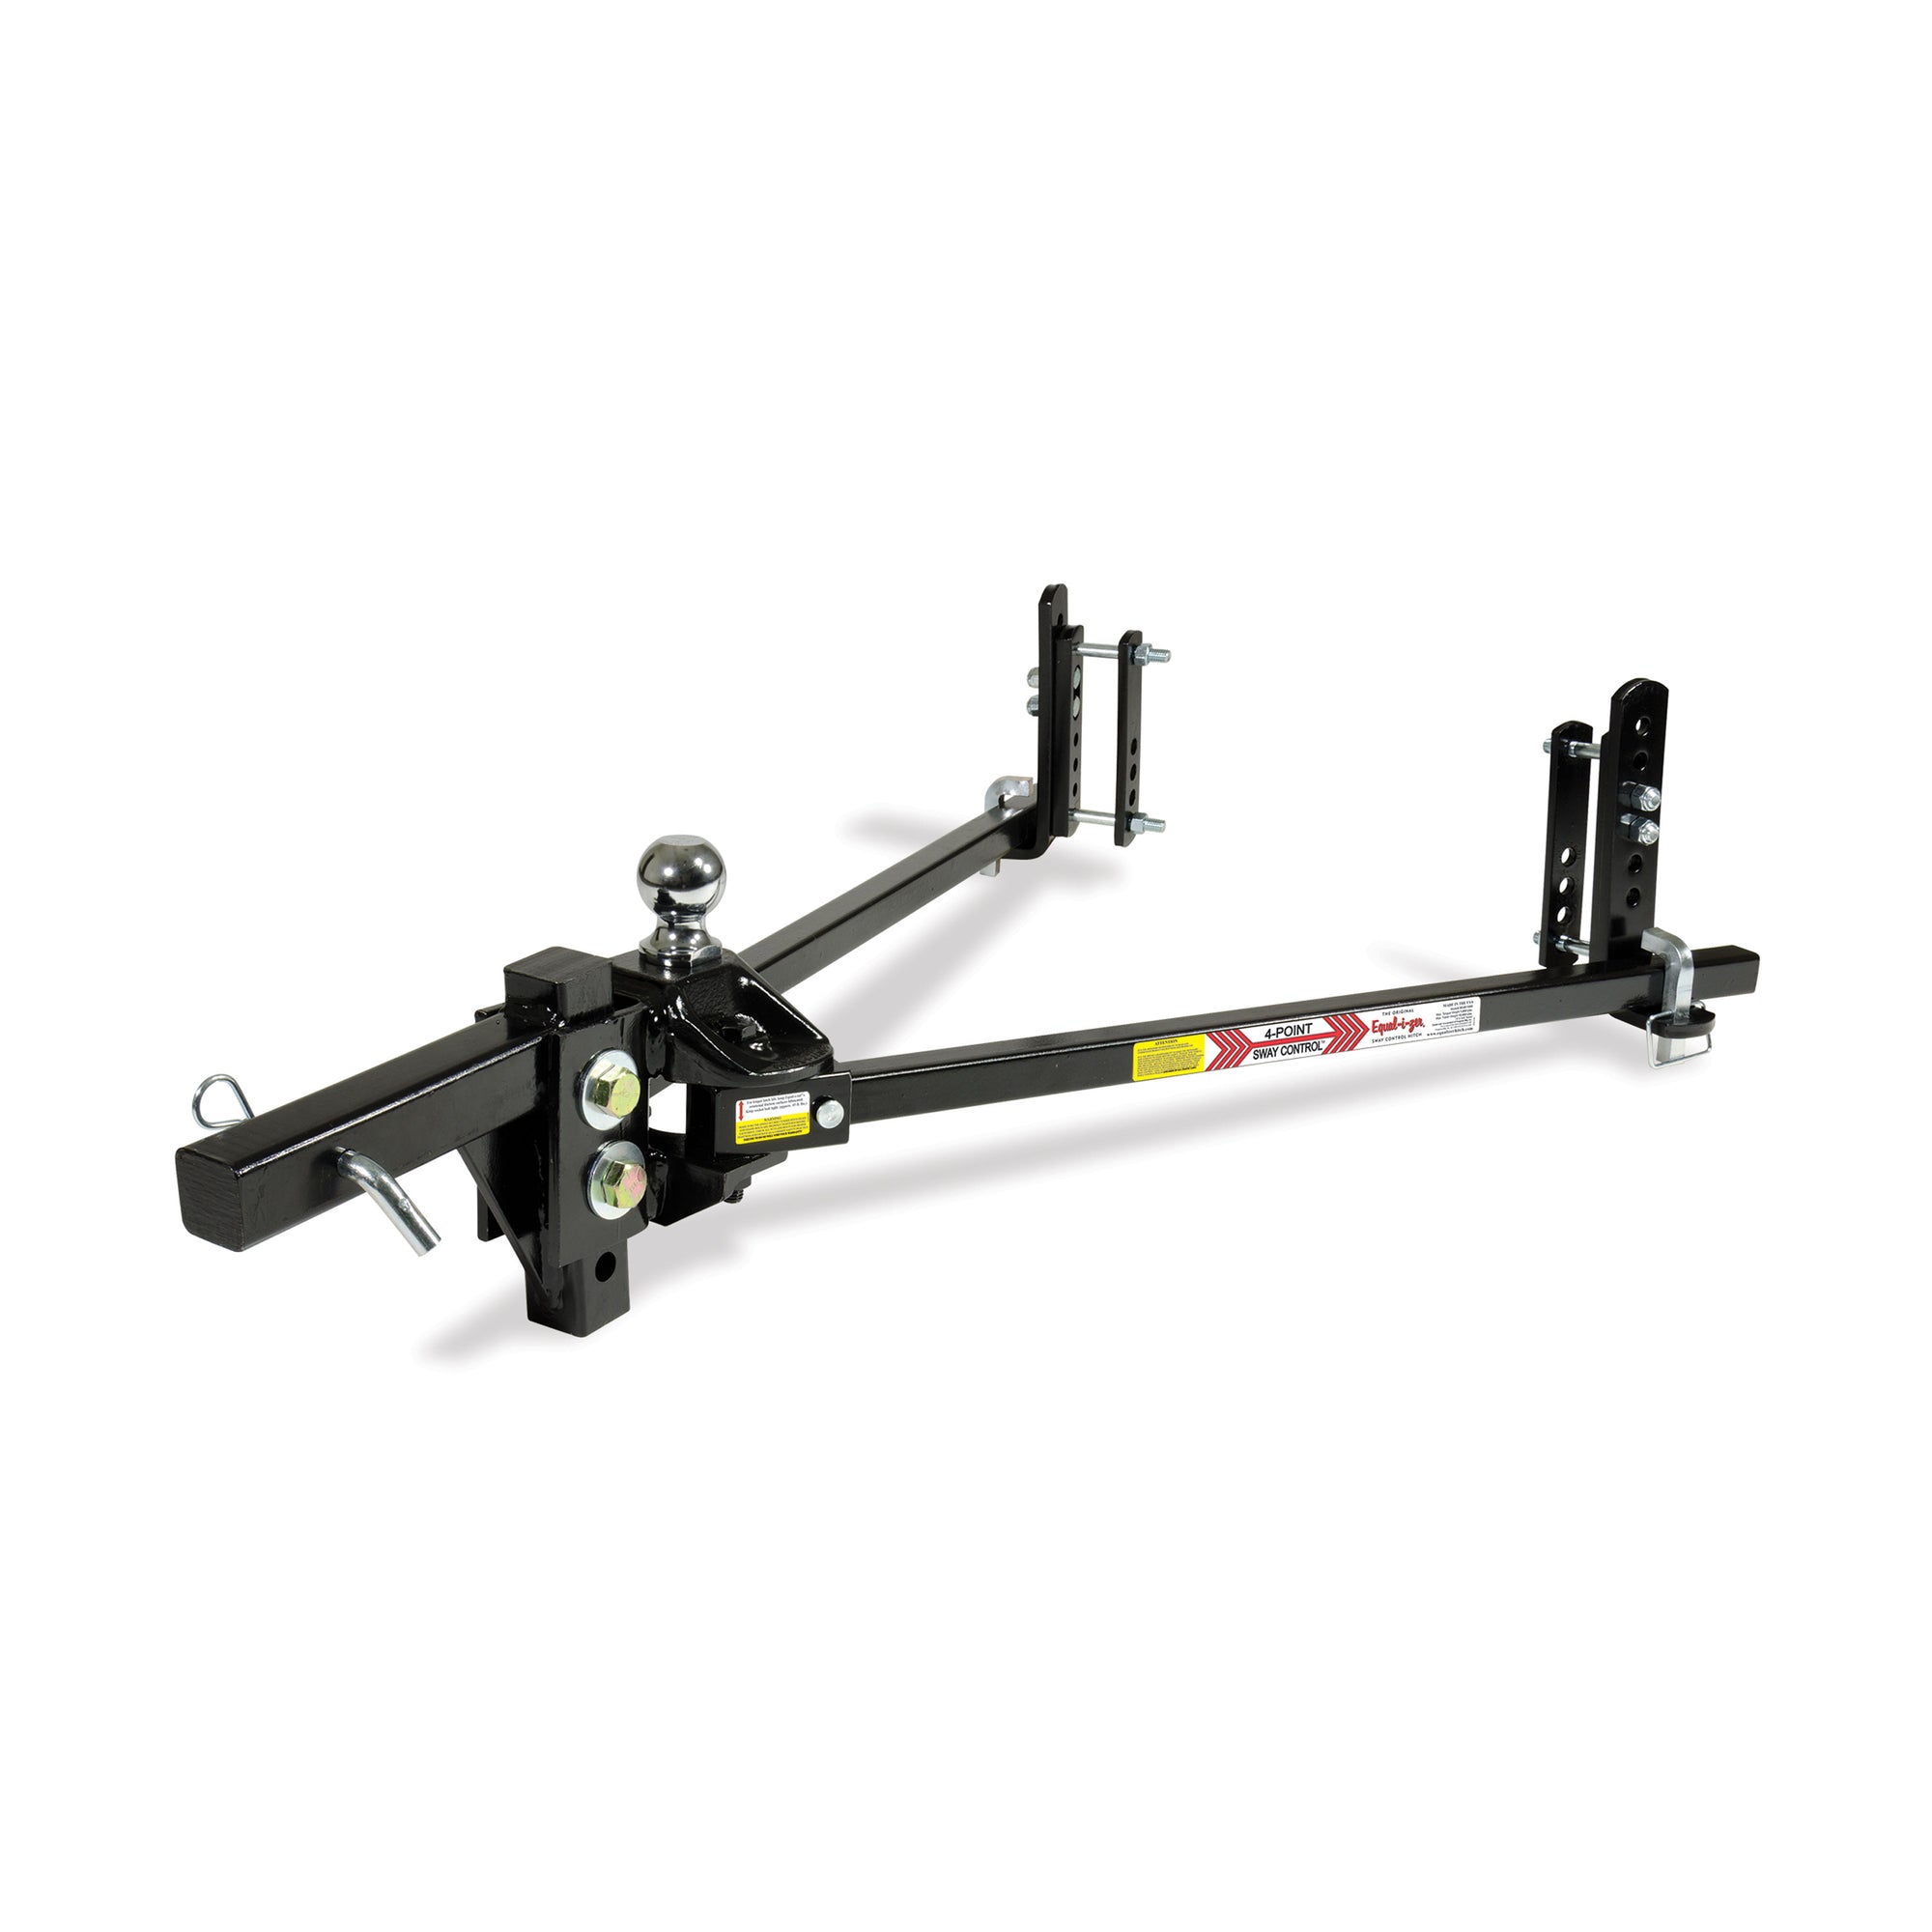 Equal-i-zer 90-00-1200 Sway Control Hitch - 1,200 lbs. TW/12,000 lbs. GTW